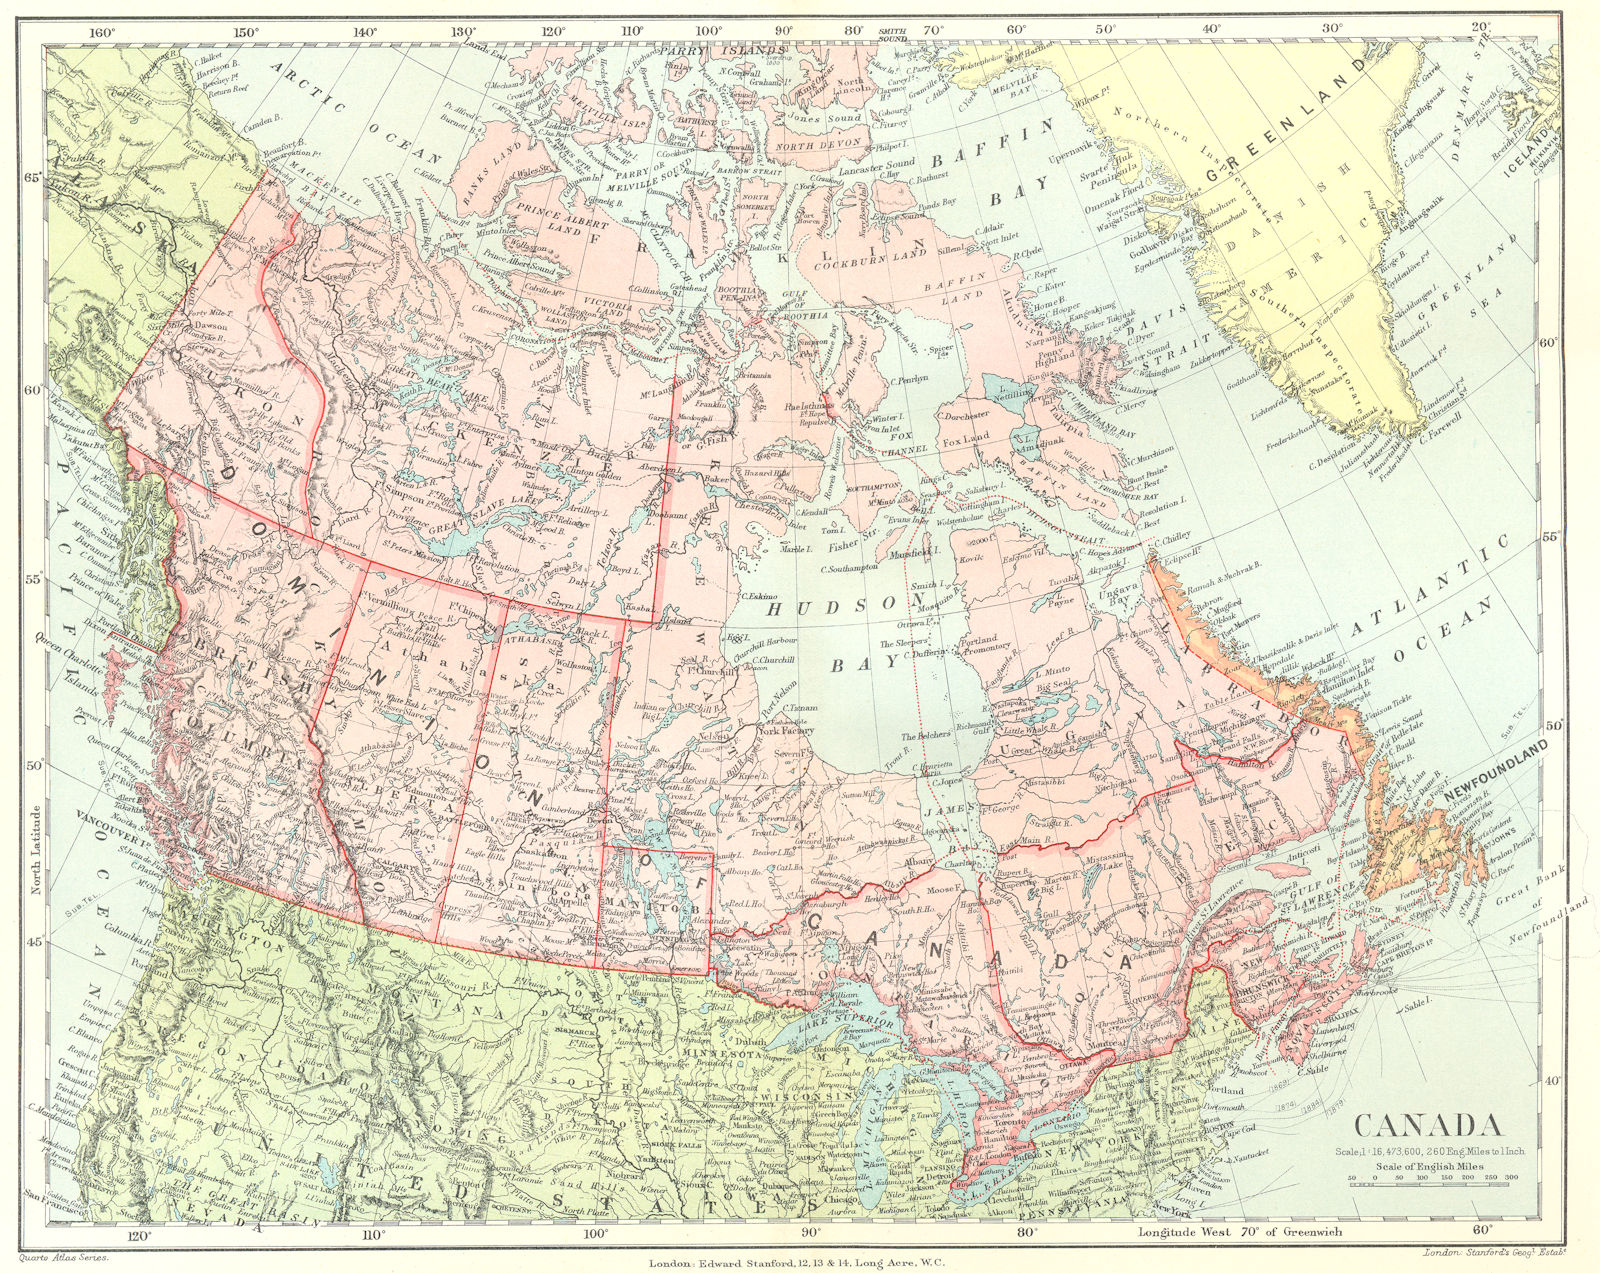 DOMNION OF CANADA. colony of Newfoundland & Labrador separate.STANFORD 1906 map